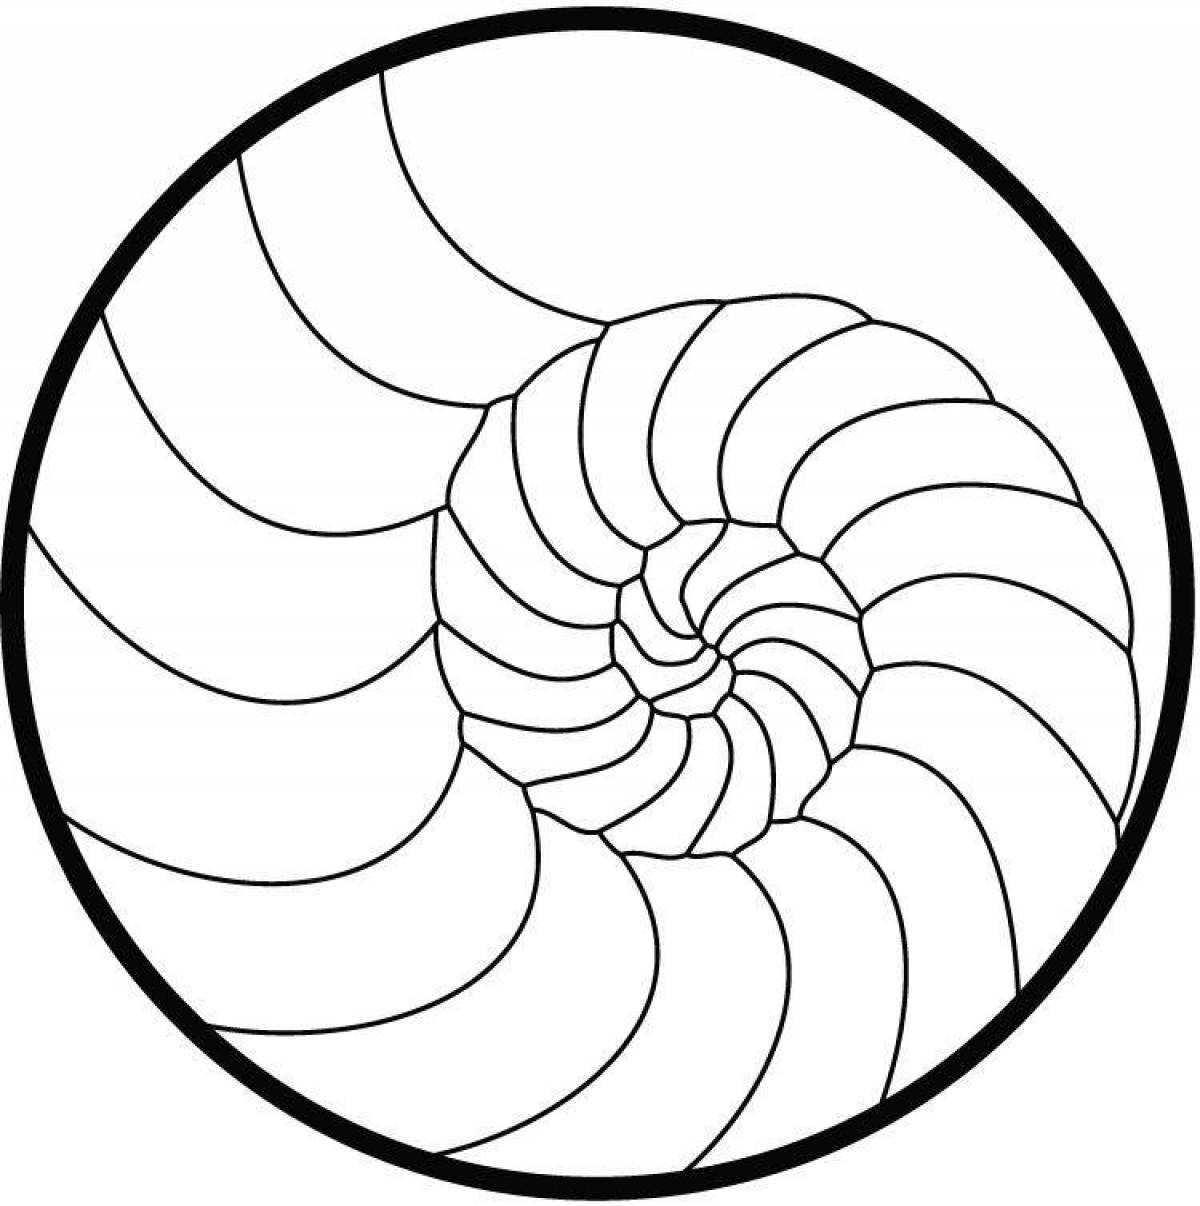 A fun creation of a spiral coloring page